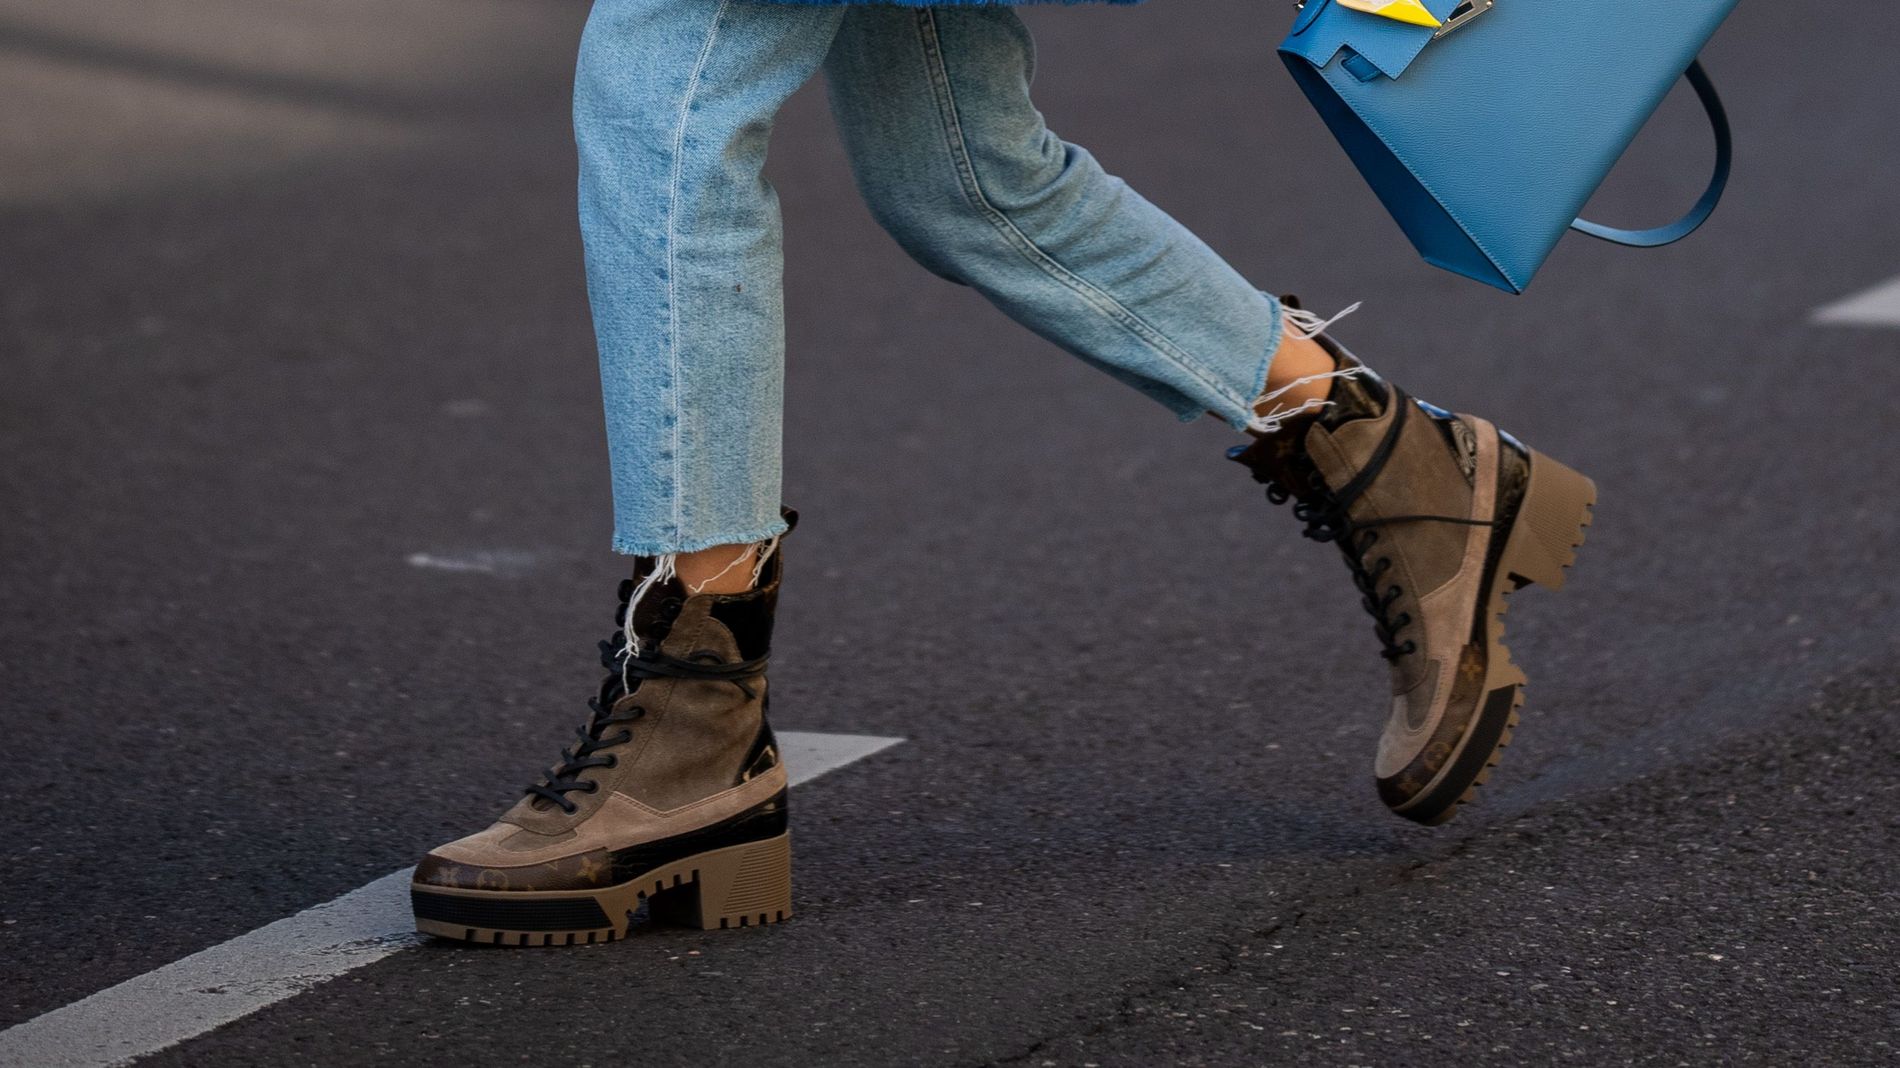 10 Best Purchases of 2017  Combat boot outfits, Louis vuitton